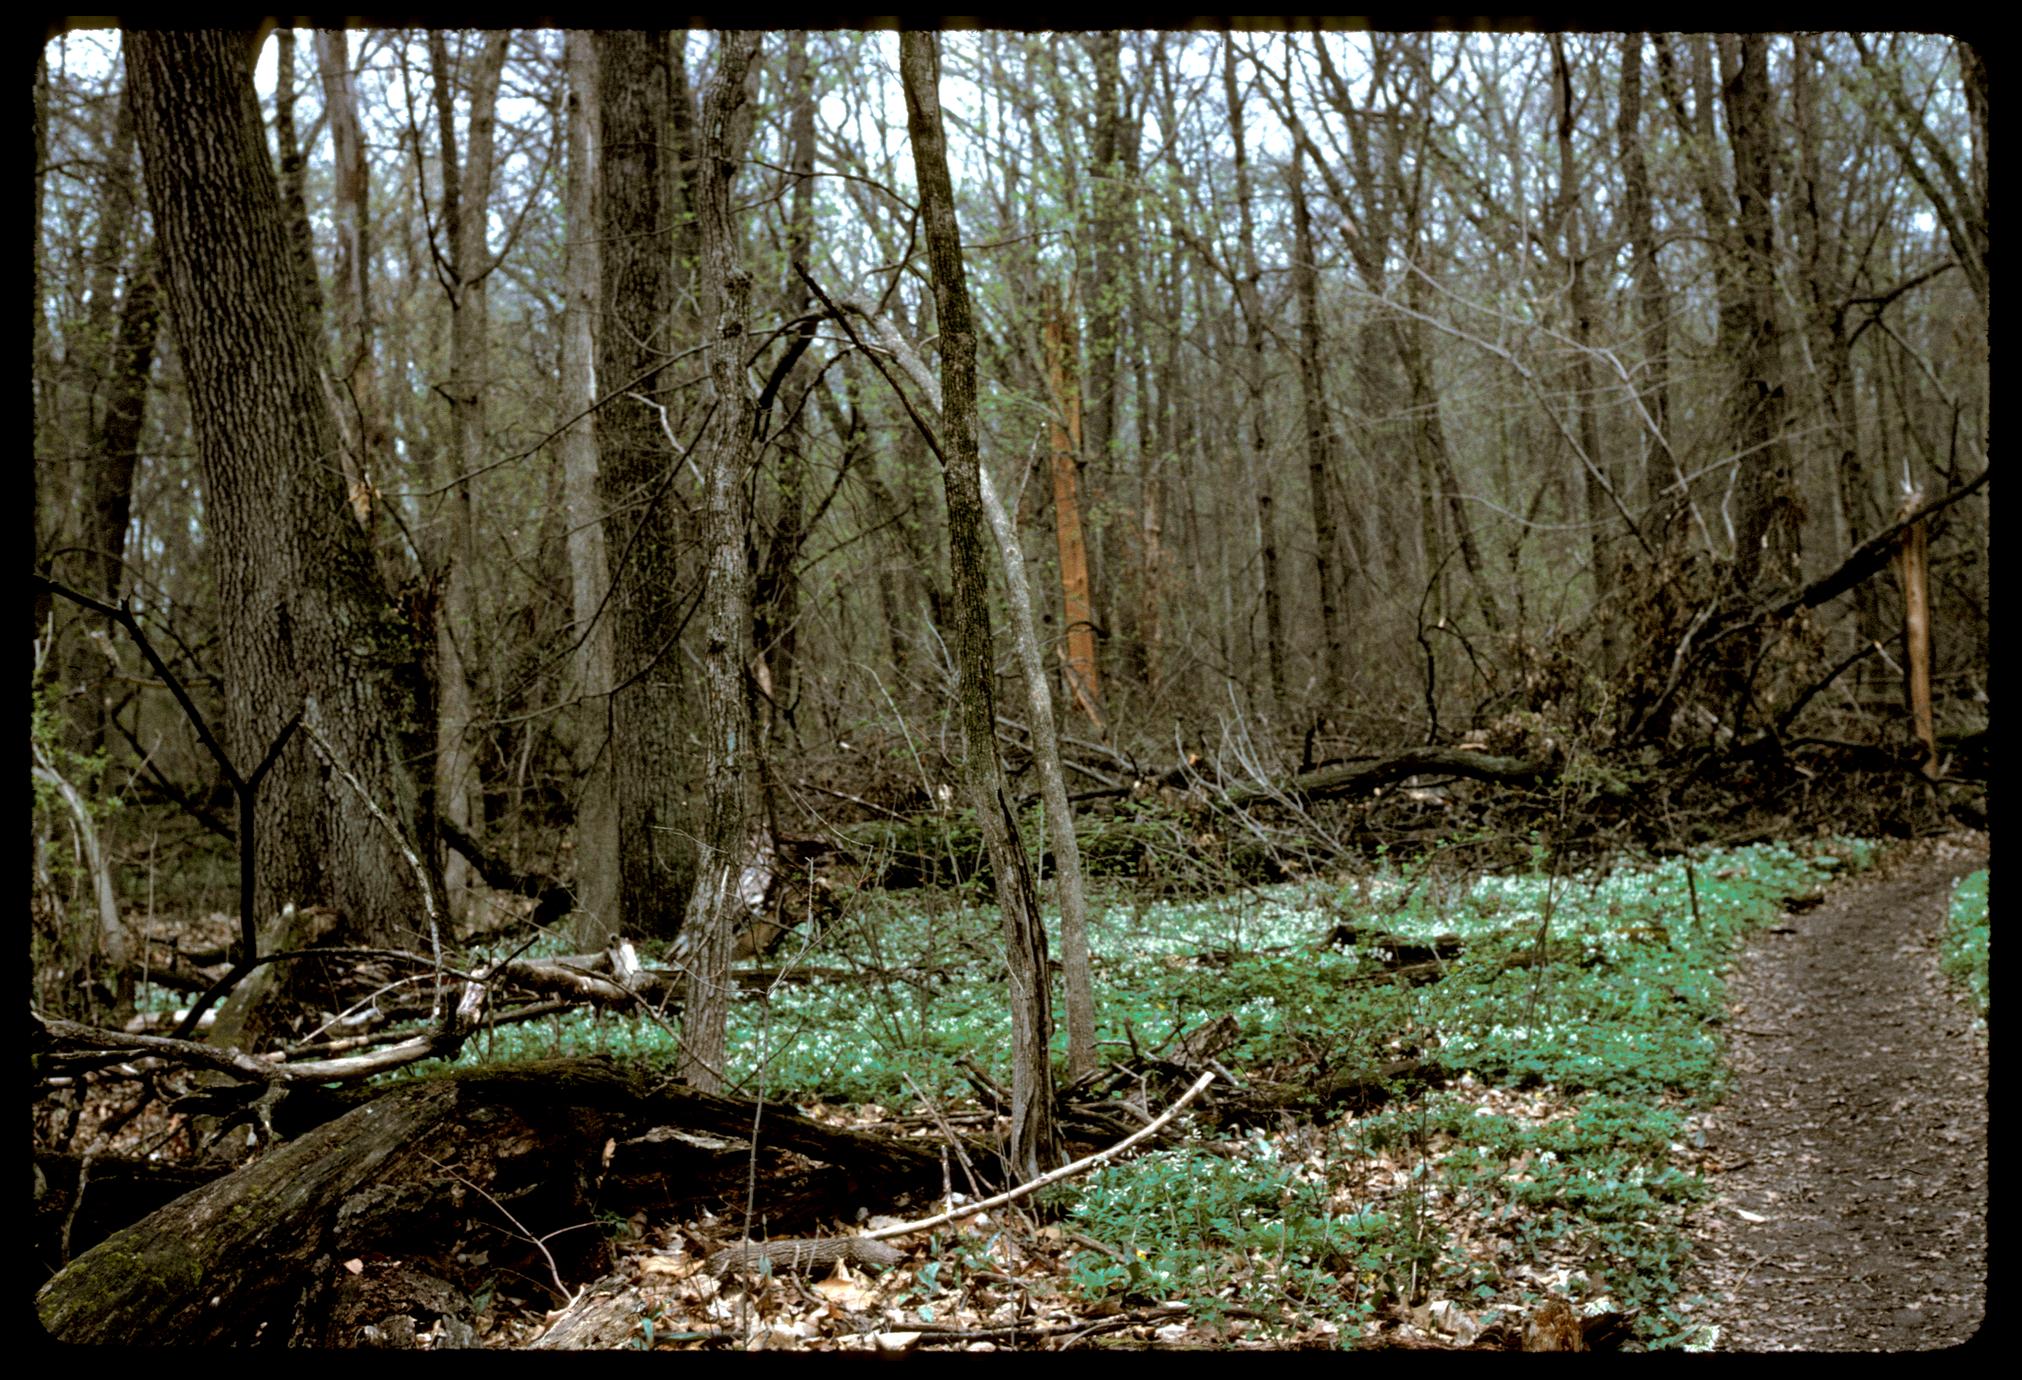 Spring view of Gallistel Woods with downed wood